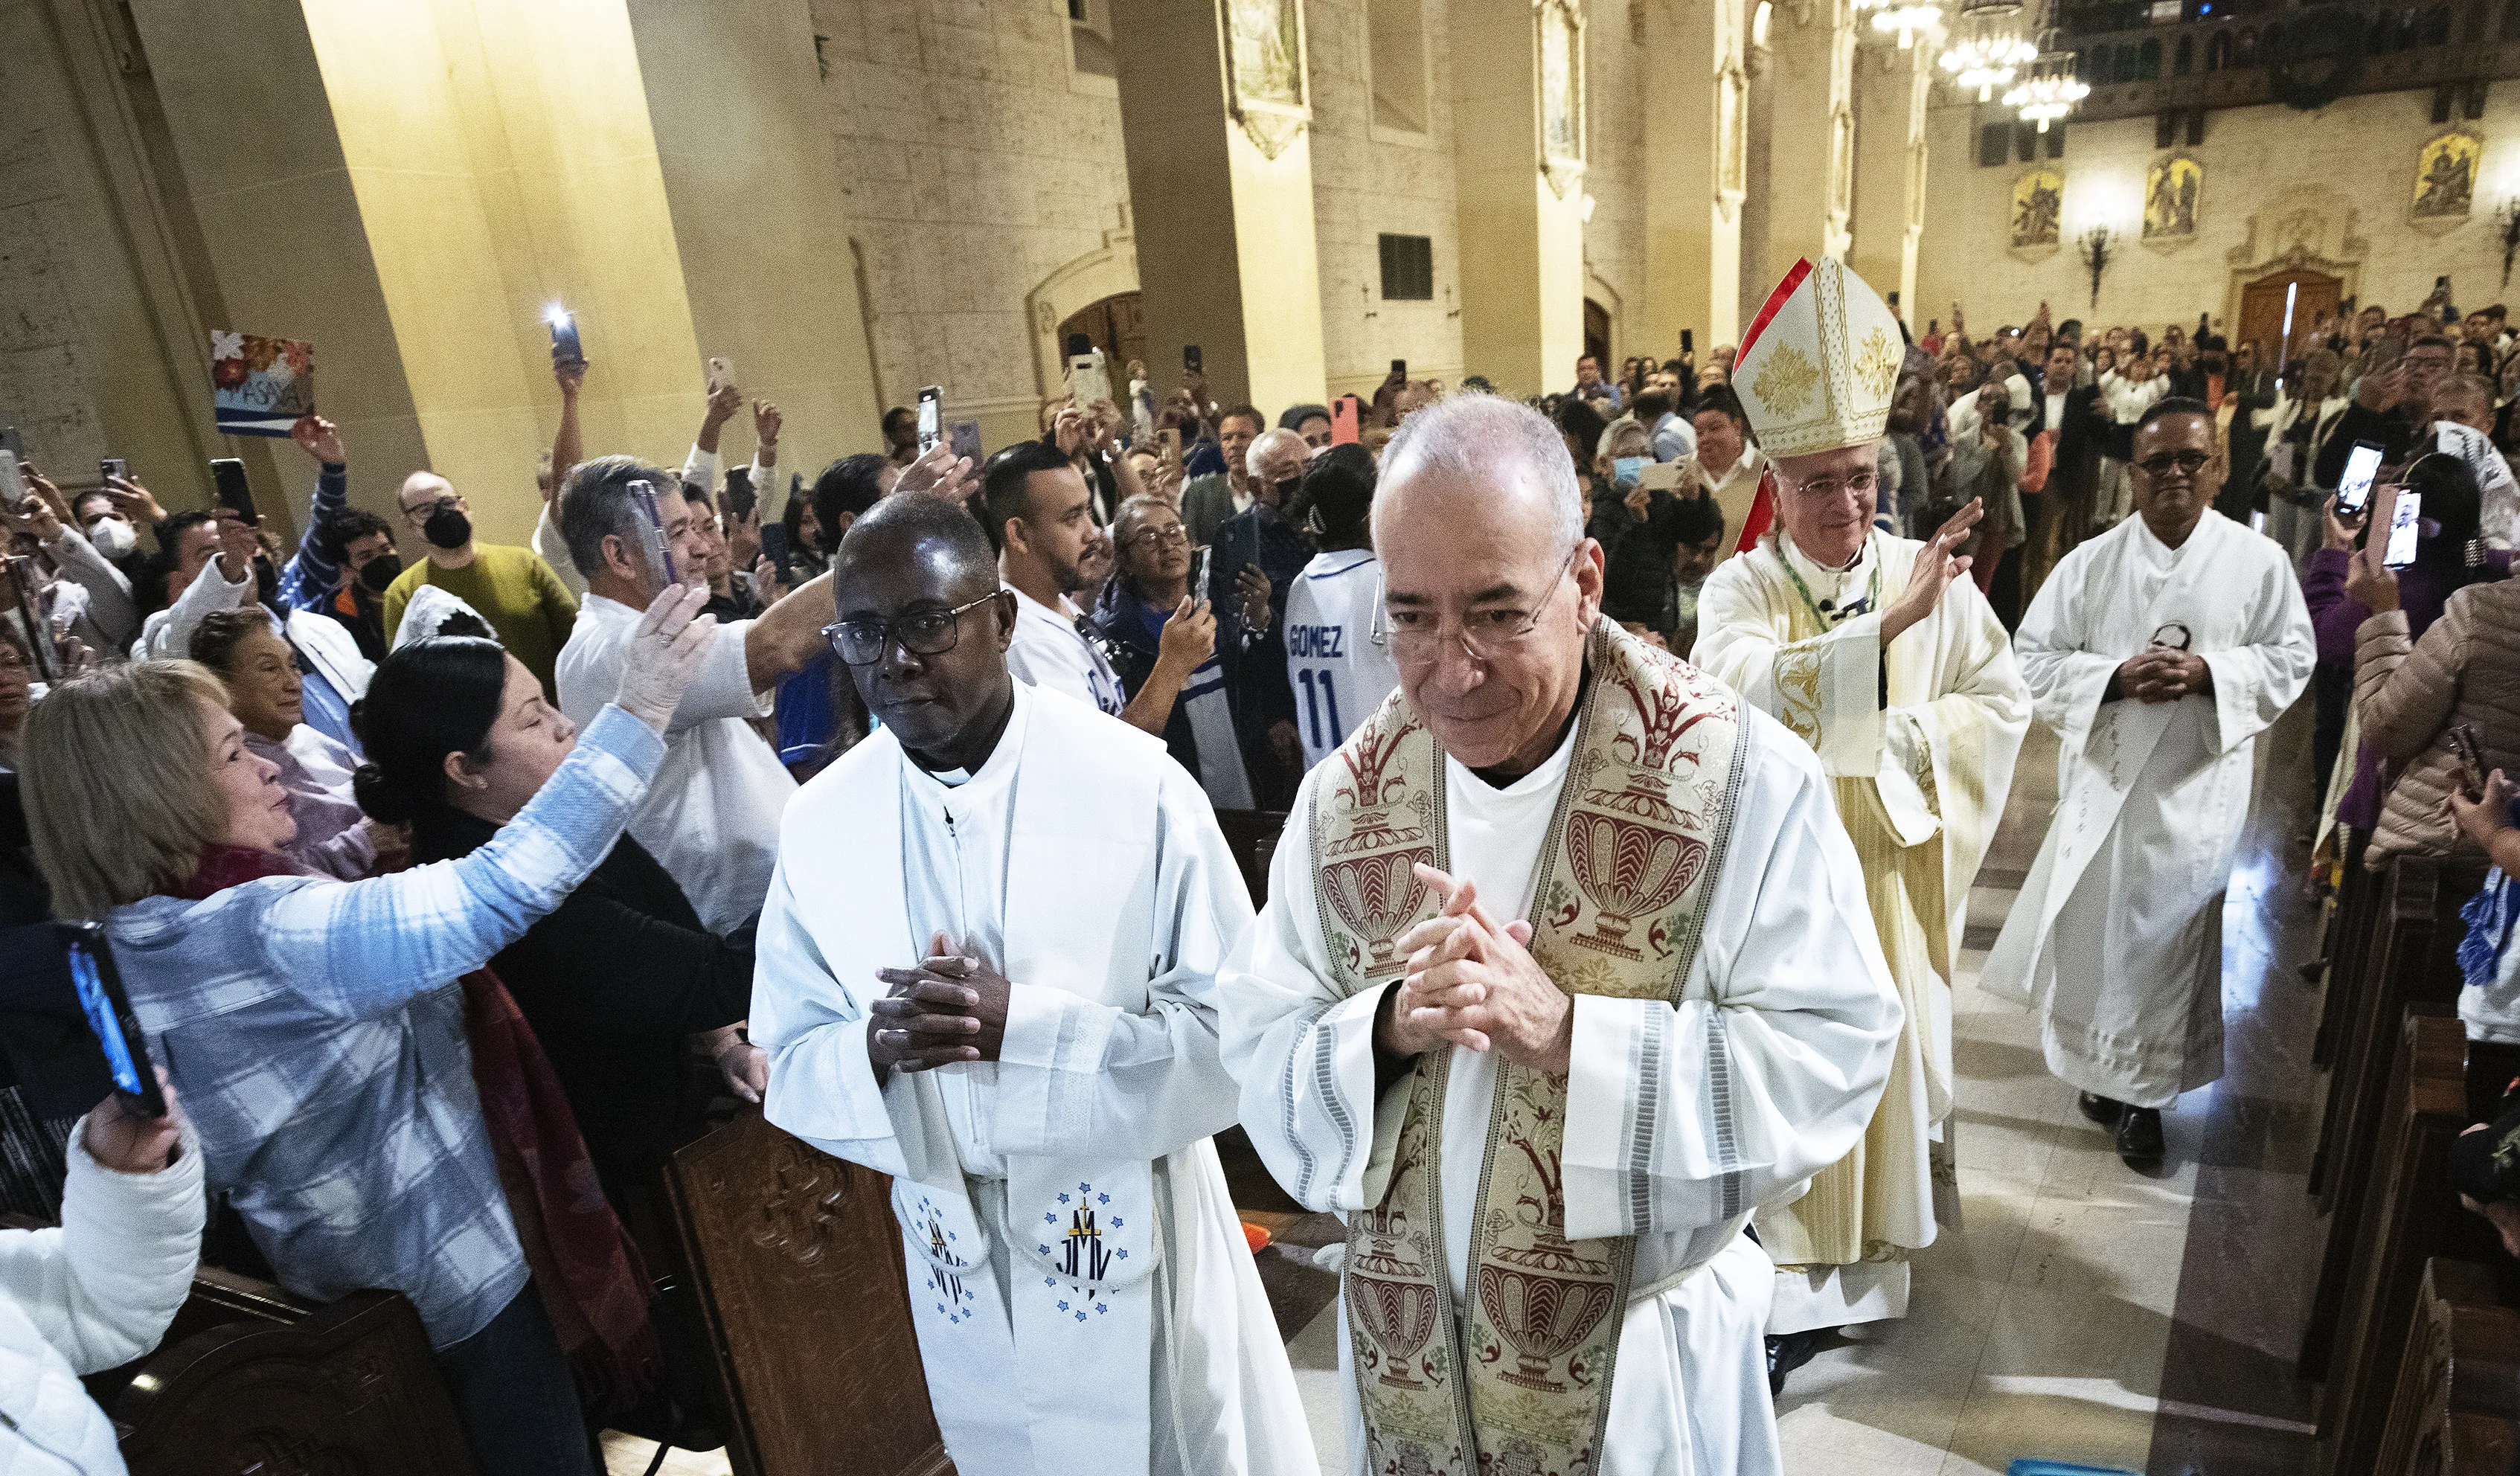 Auxiliary Bishop Silvio Báez, at right in the background, and Father Edwing Román, foreground center, both of the Archdiocese of Managua in Nicaragua, process into St. Vincent de Paul Church in Exposition Park in Los Angeles for Mass on Jan. 6, 2024.?w=200&h=150